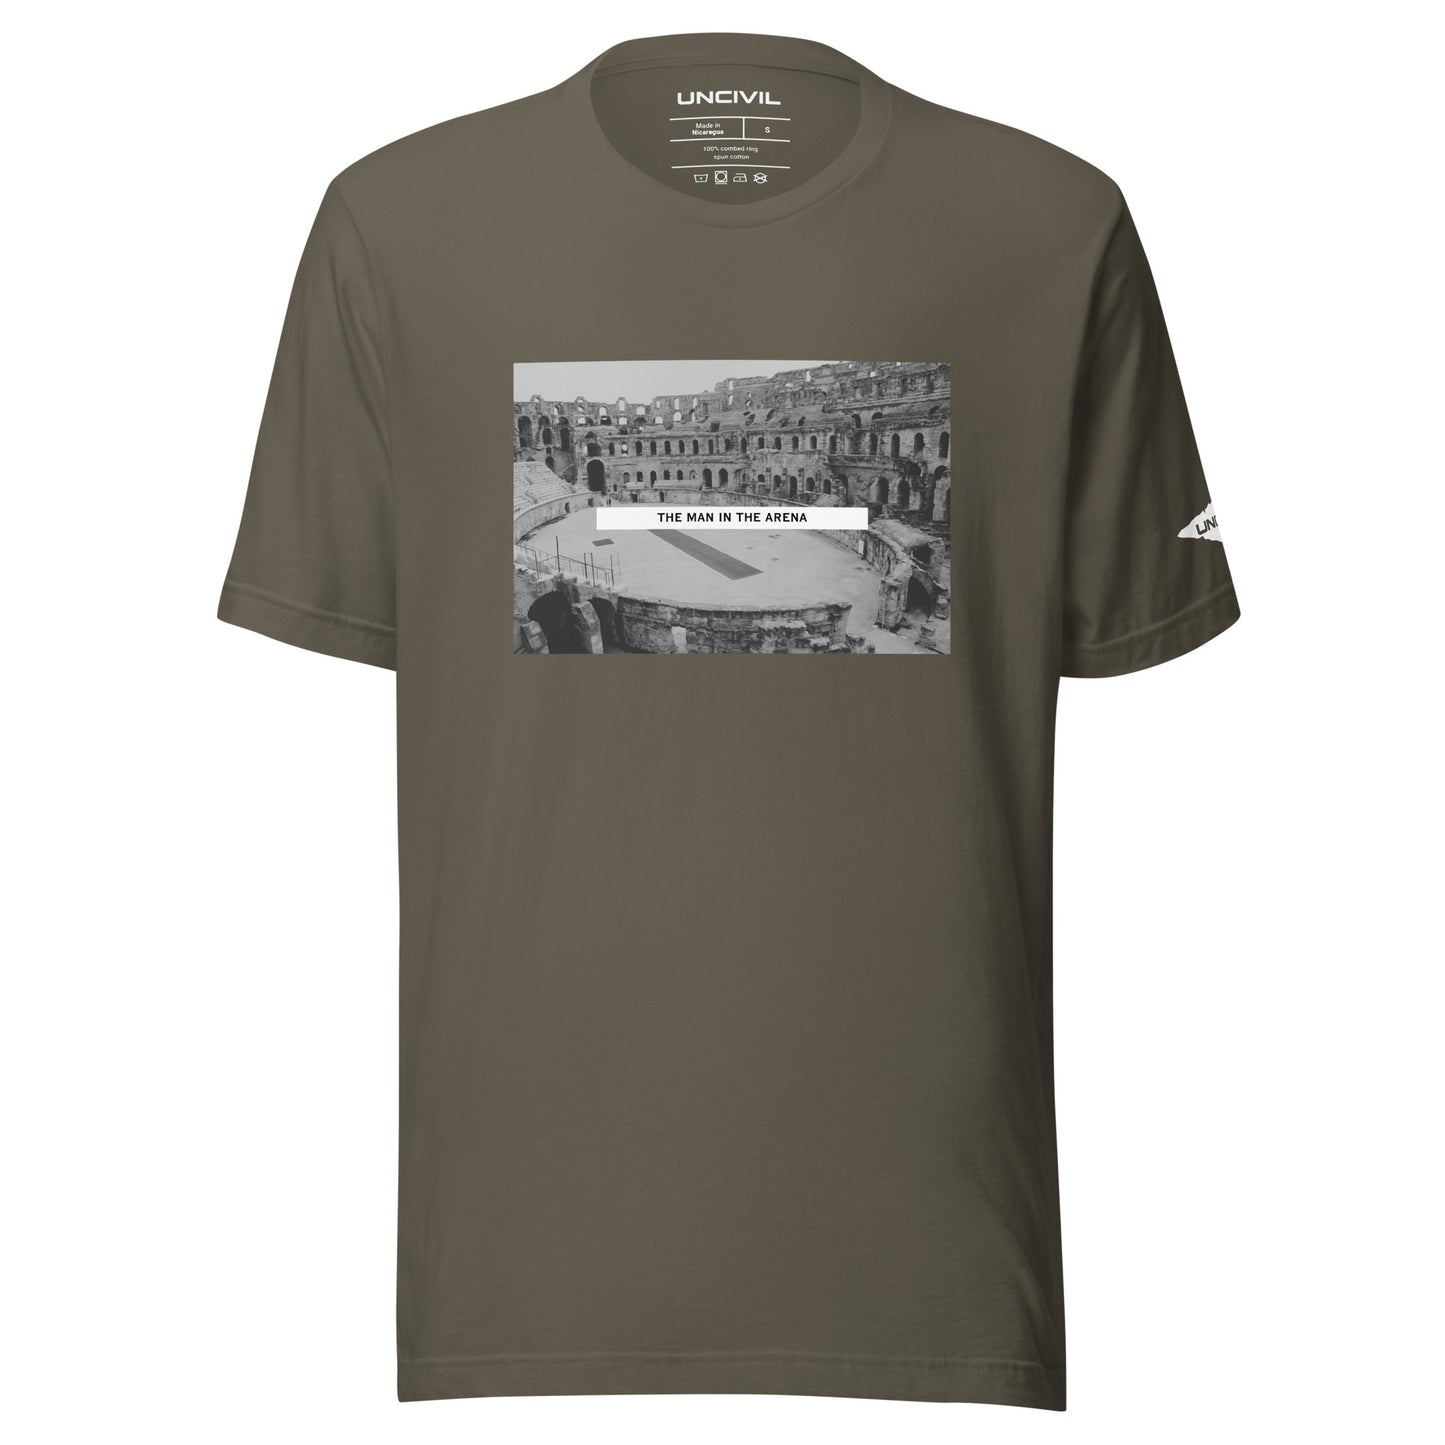 Man in the Arena t-shirt. Inspired by Theodore Roosevelt's Citizenship in a Republic speech, Army Green graphic shirt.